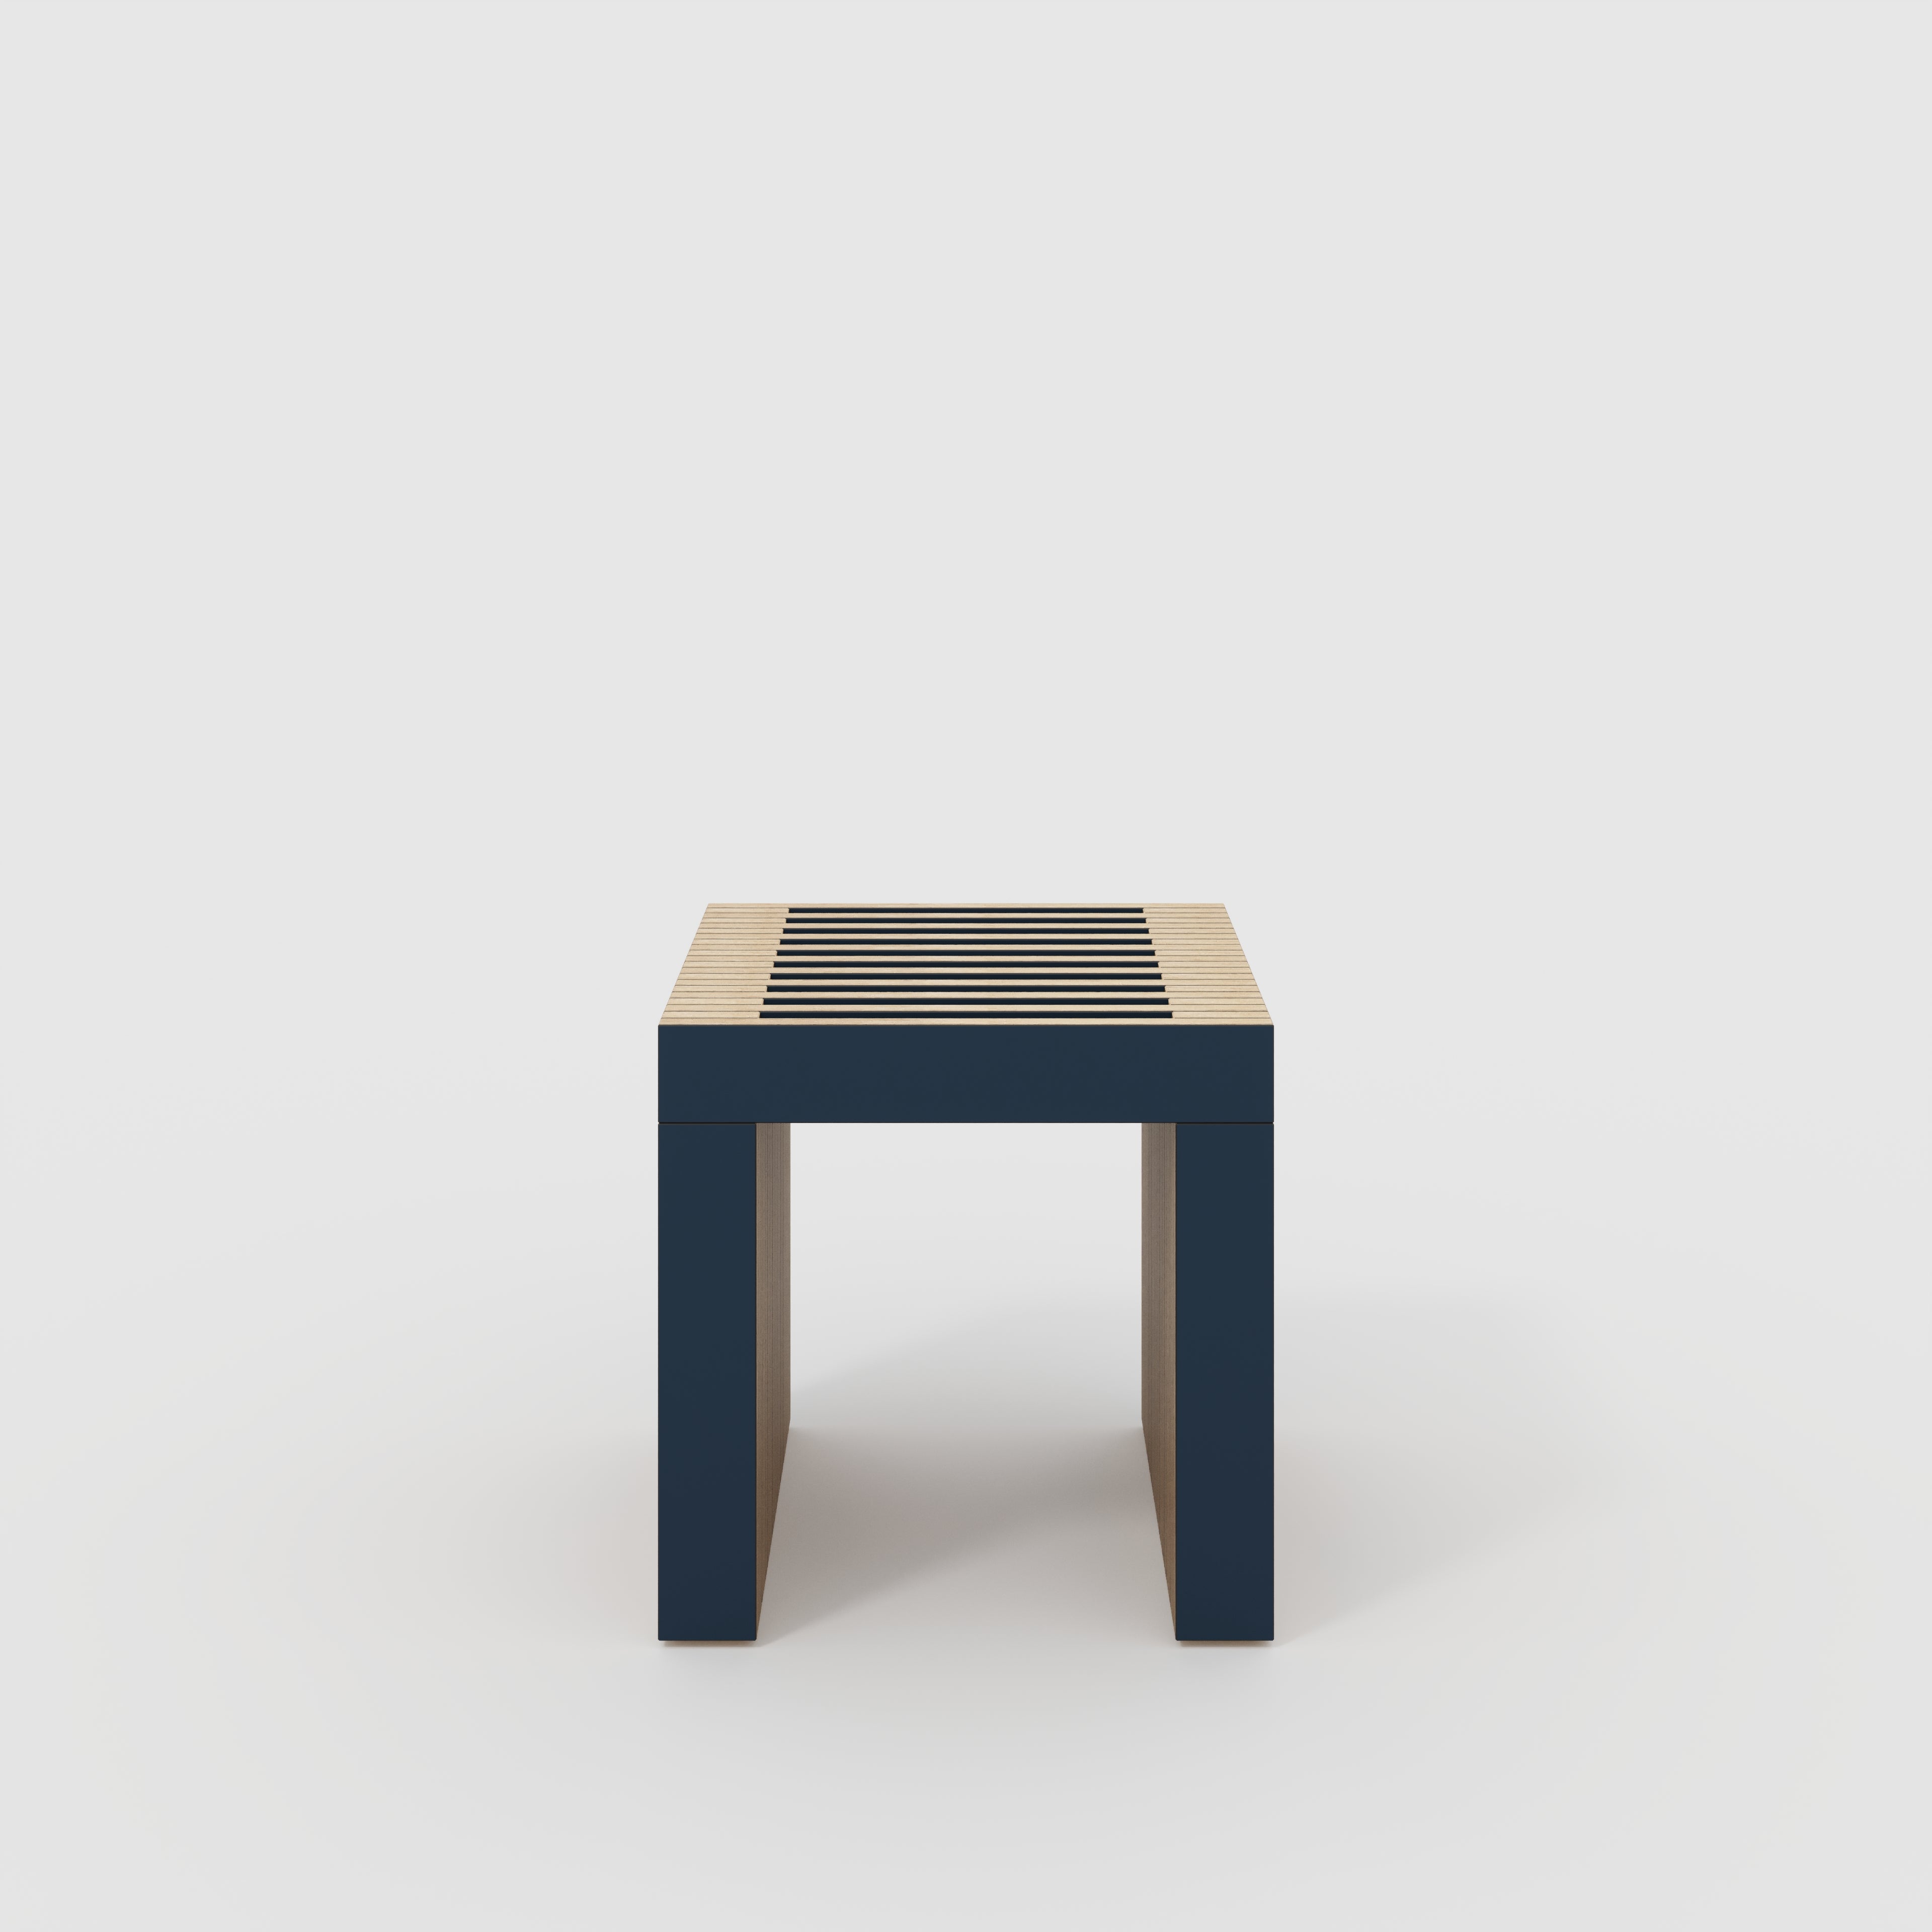 Stool with Slats - Formica Night Sea Blue - 450(w) x 410(d) x 450(h)